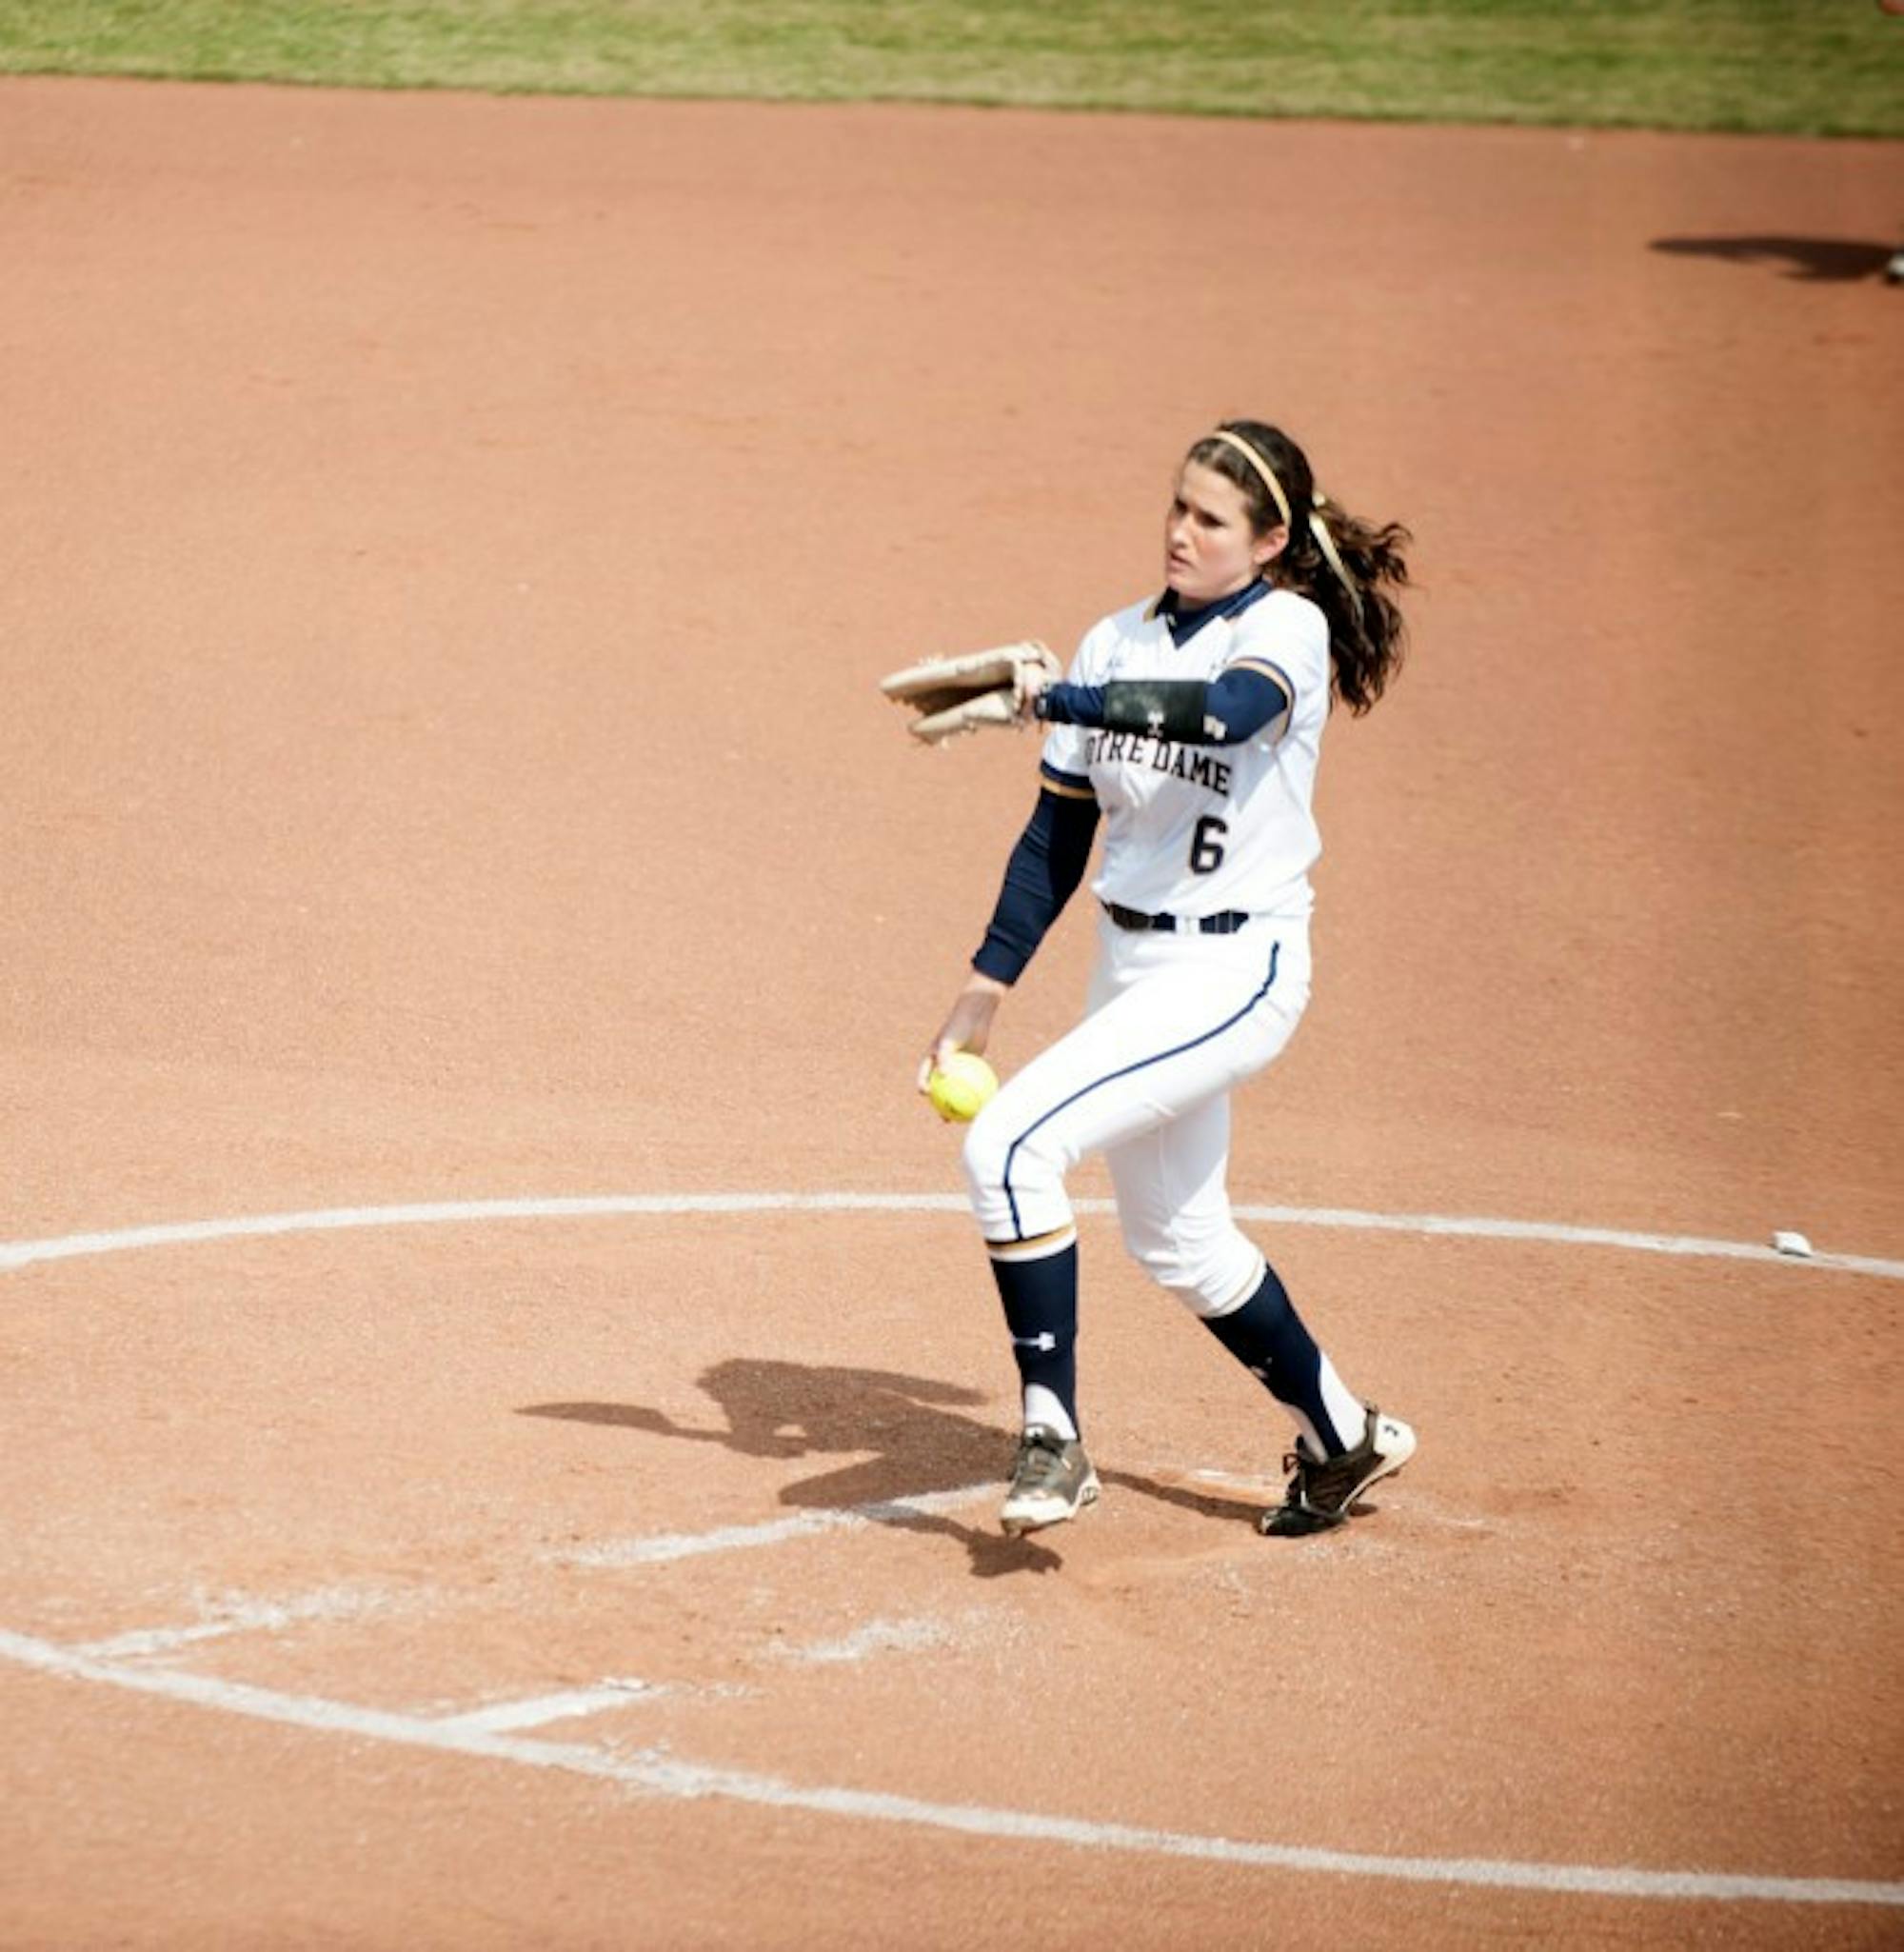 Irish junior pitcher Rachel Nasland delivers a pitch during Notre Dame’s 6-1 win over Georgia Tech on March 21.